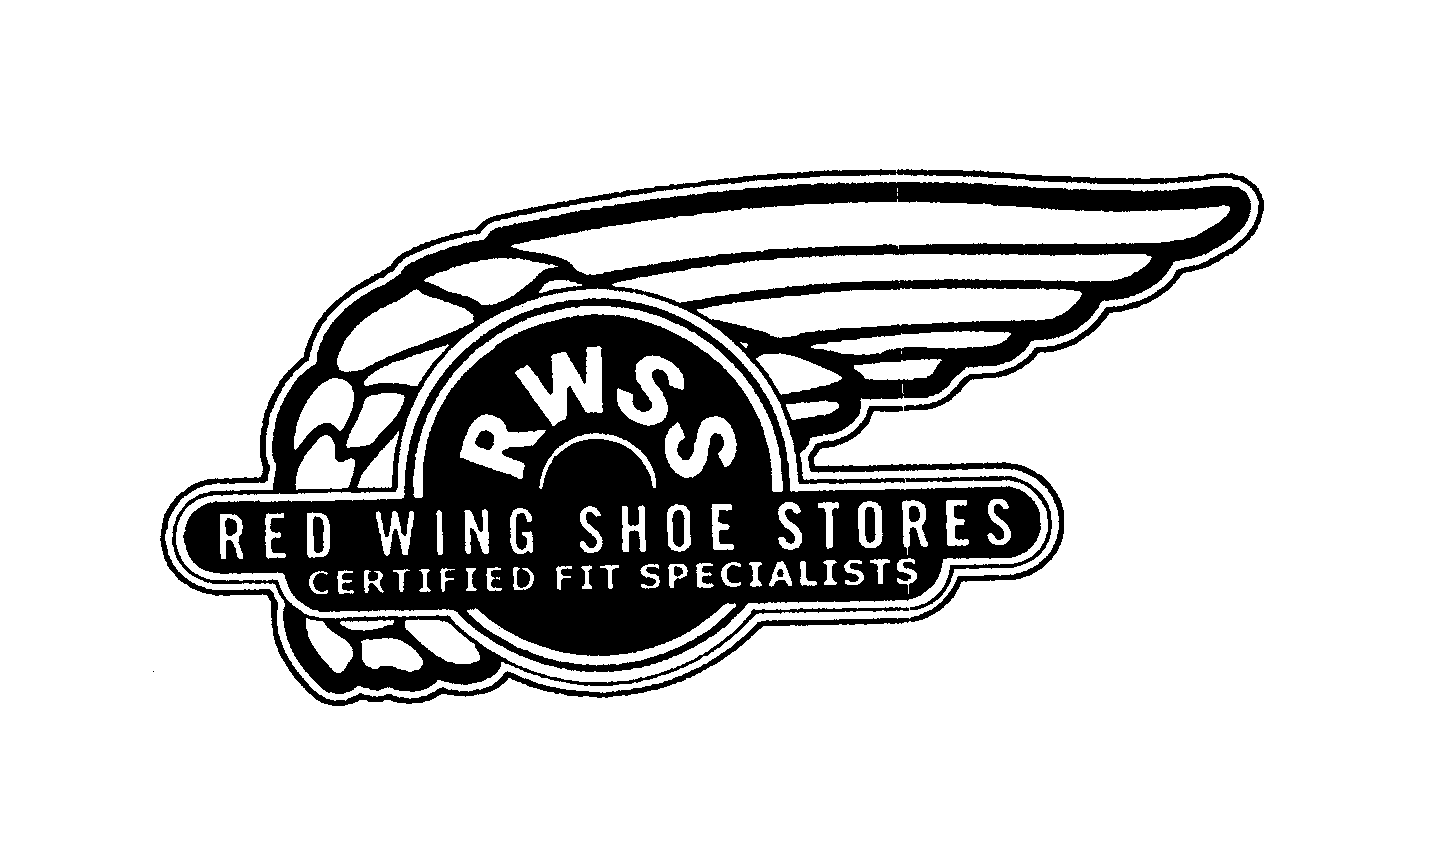  RED WING SHOE STORES CERTIFIED FIT SPECIALISTS RWSS